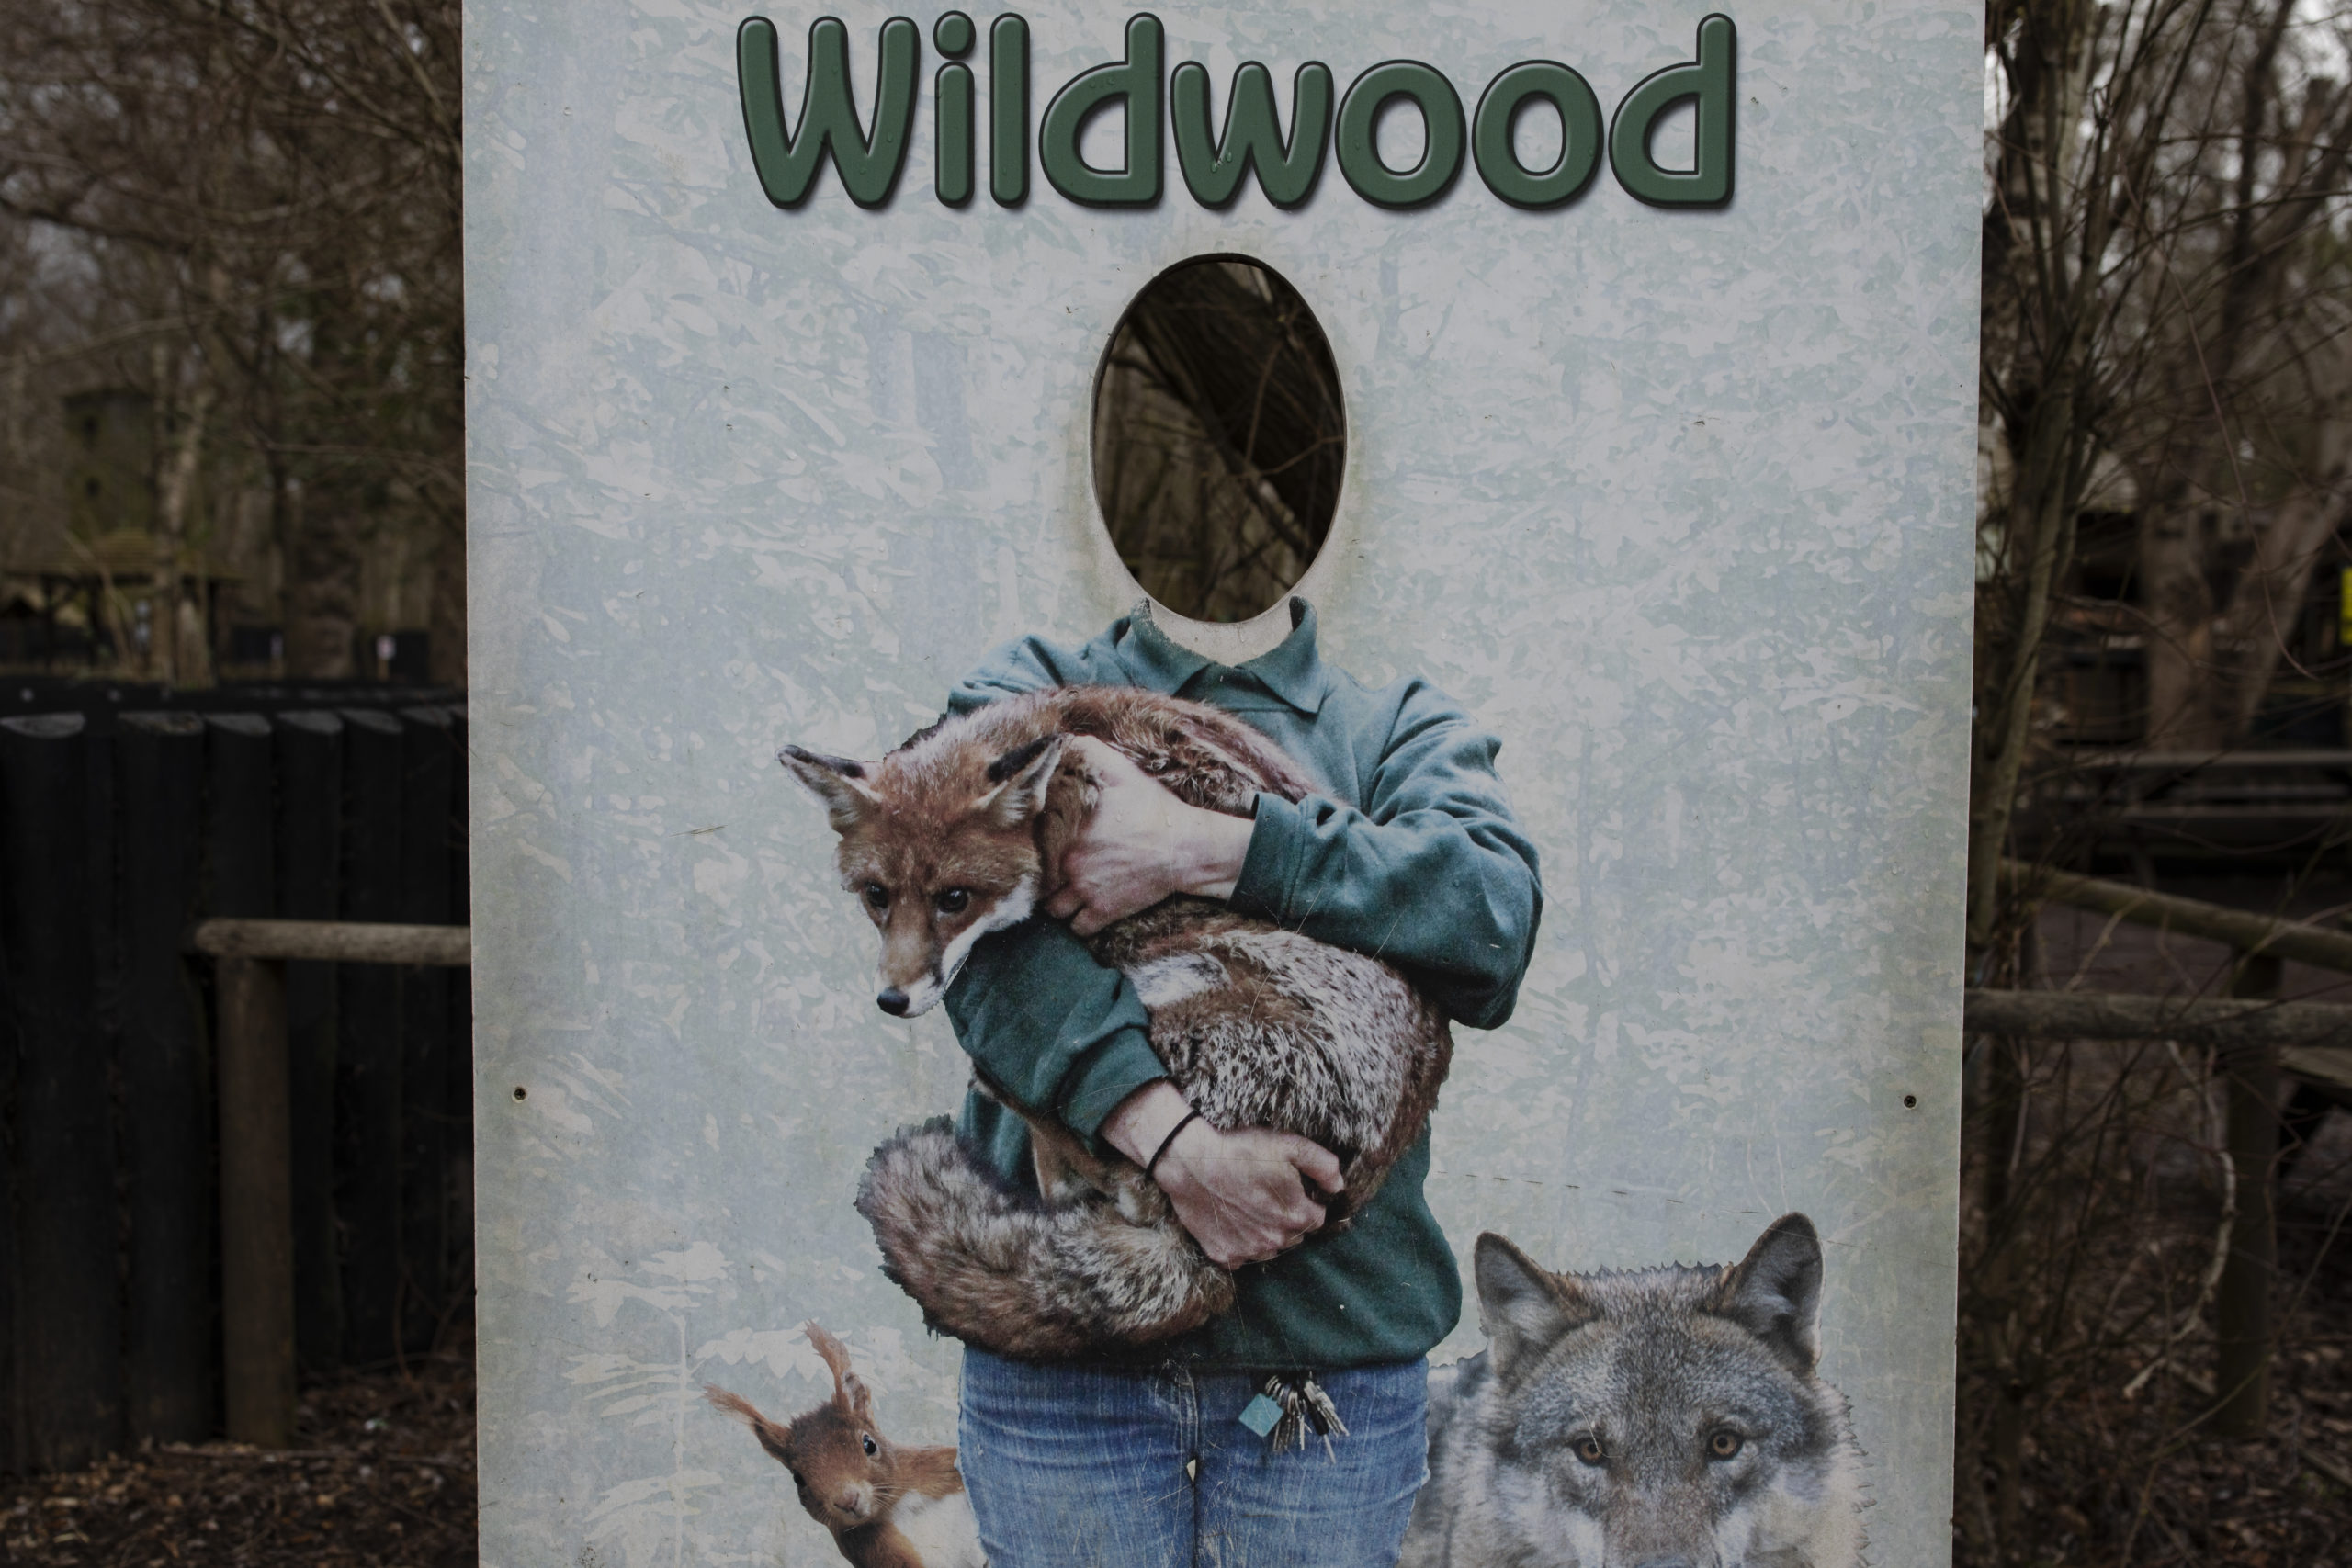 A sign welcomes visitors to the Wildwood Trust. (Photo: Dan Kitwood, Getty Images)